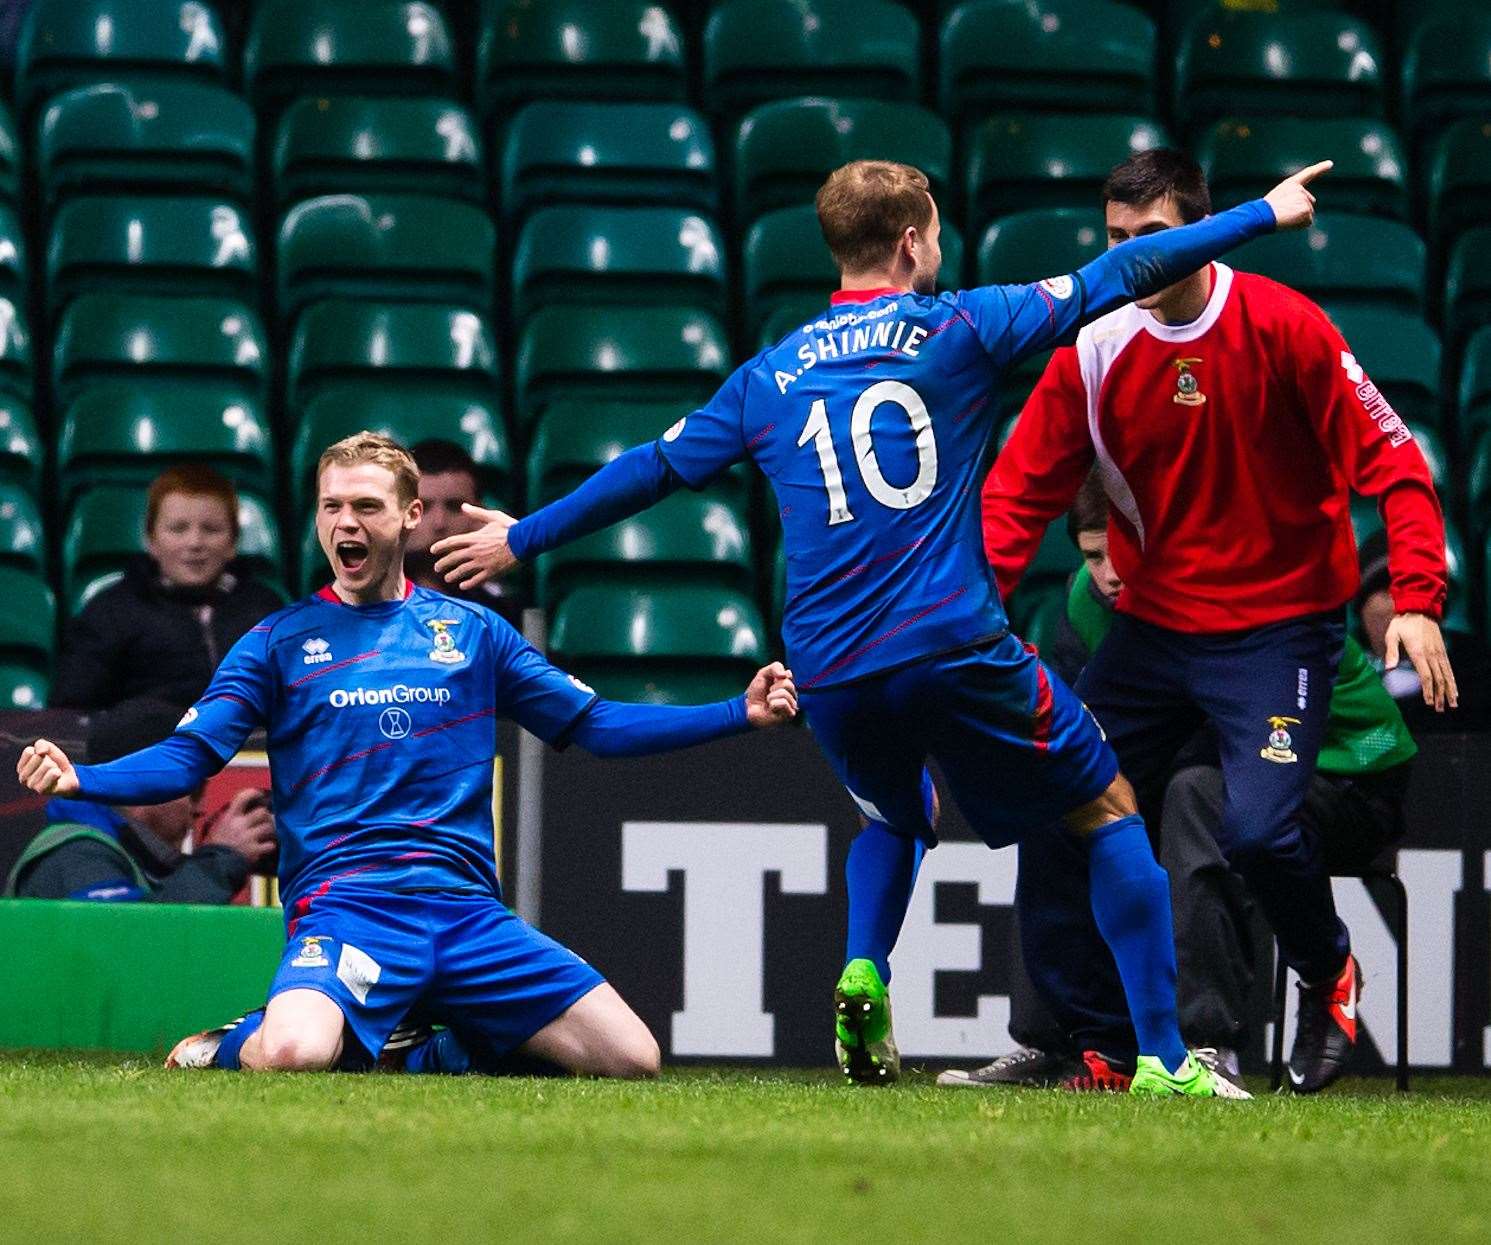 Billy McKay celebrates the winning goal against Celtic with Andrew Shinnie in November 2012